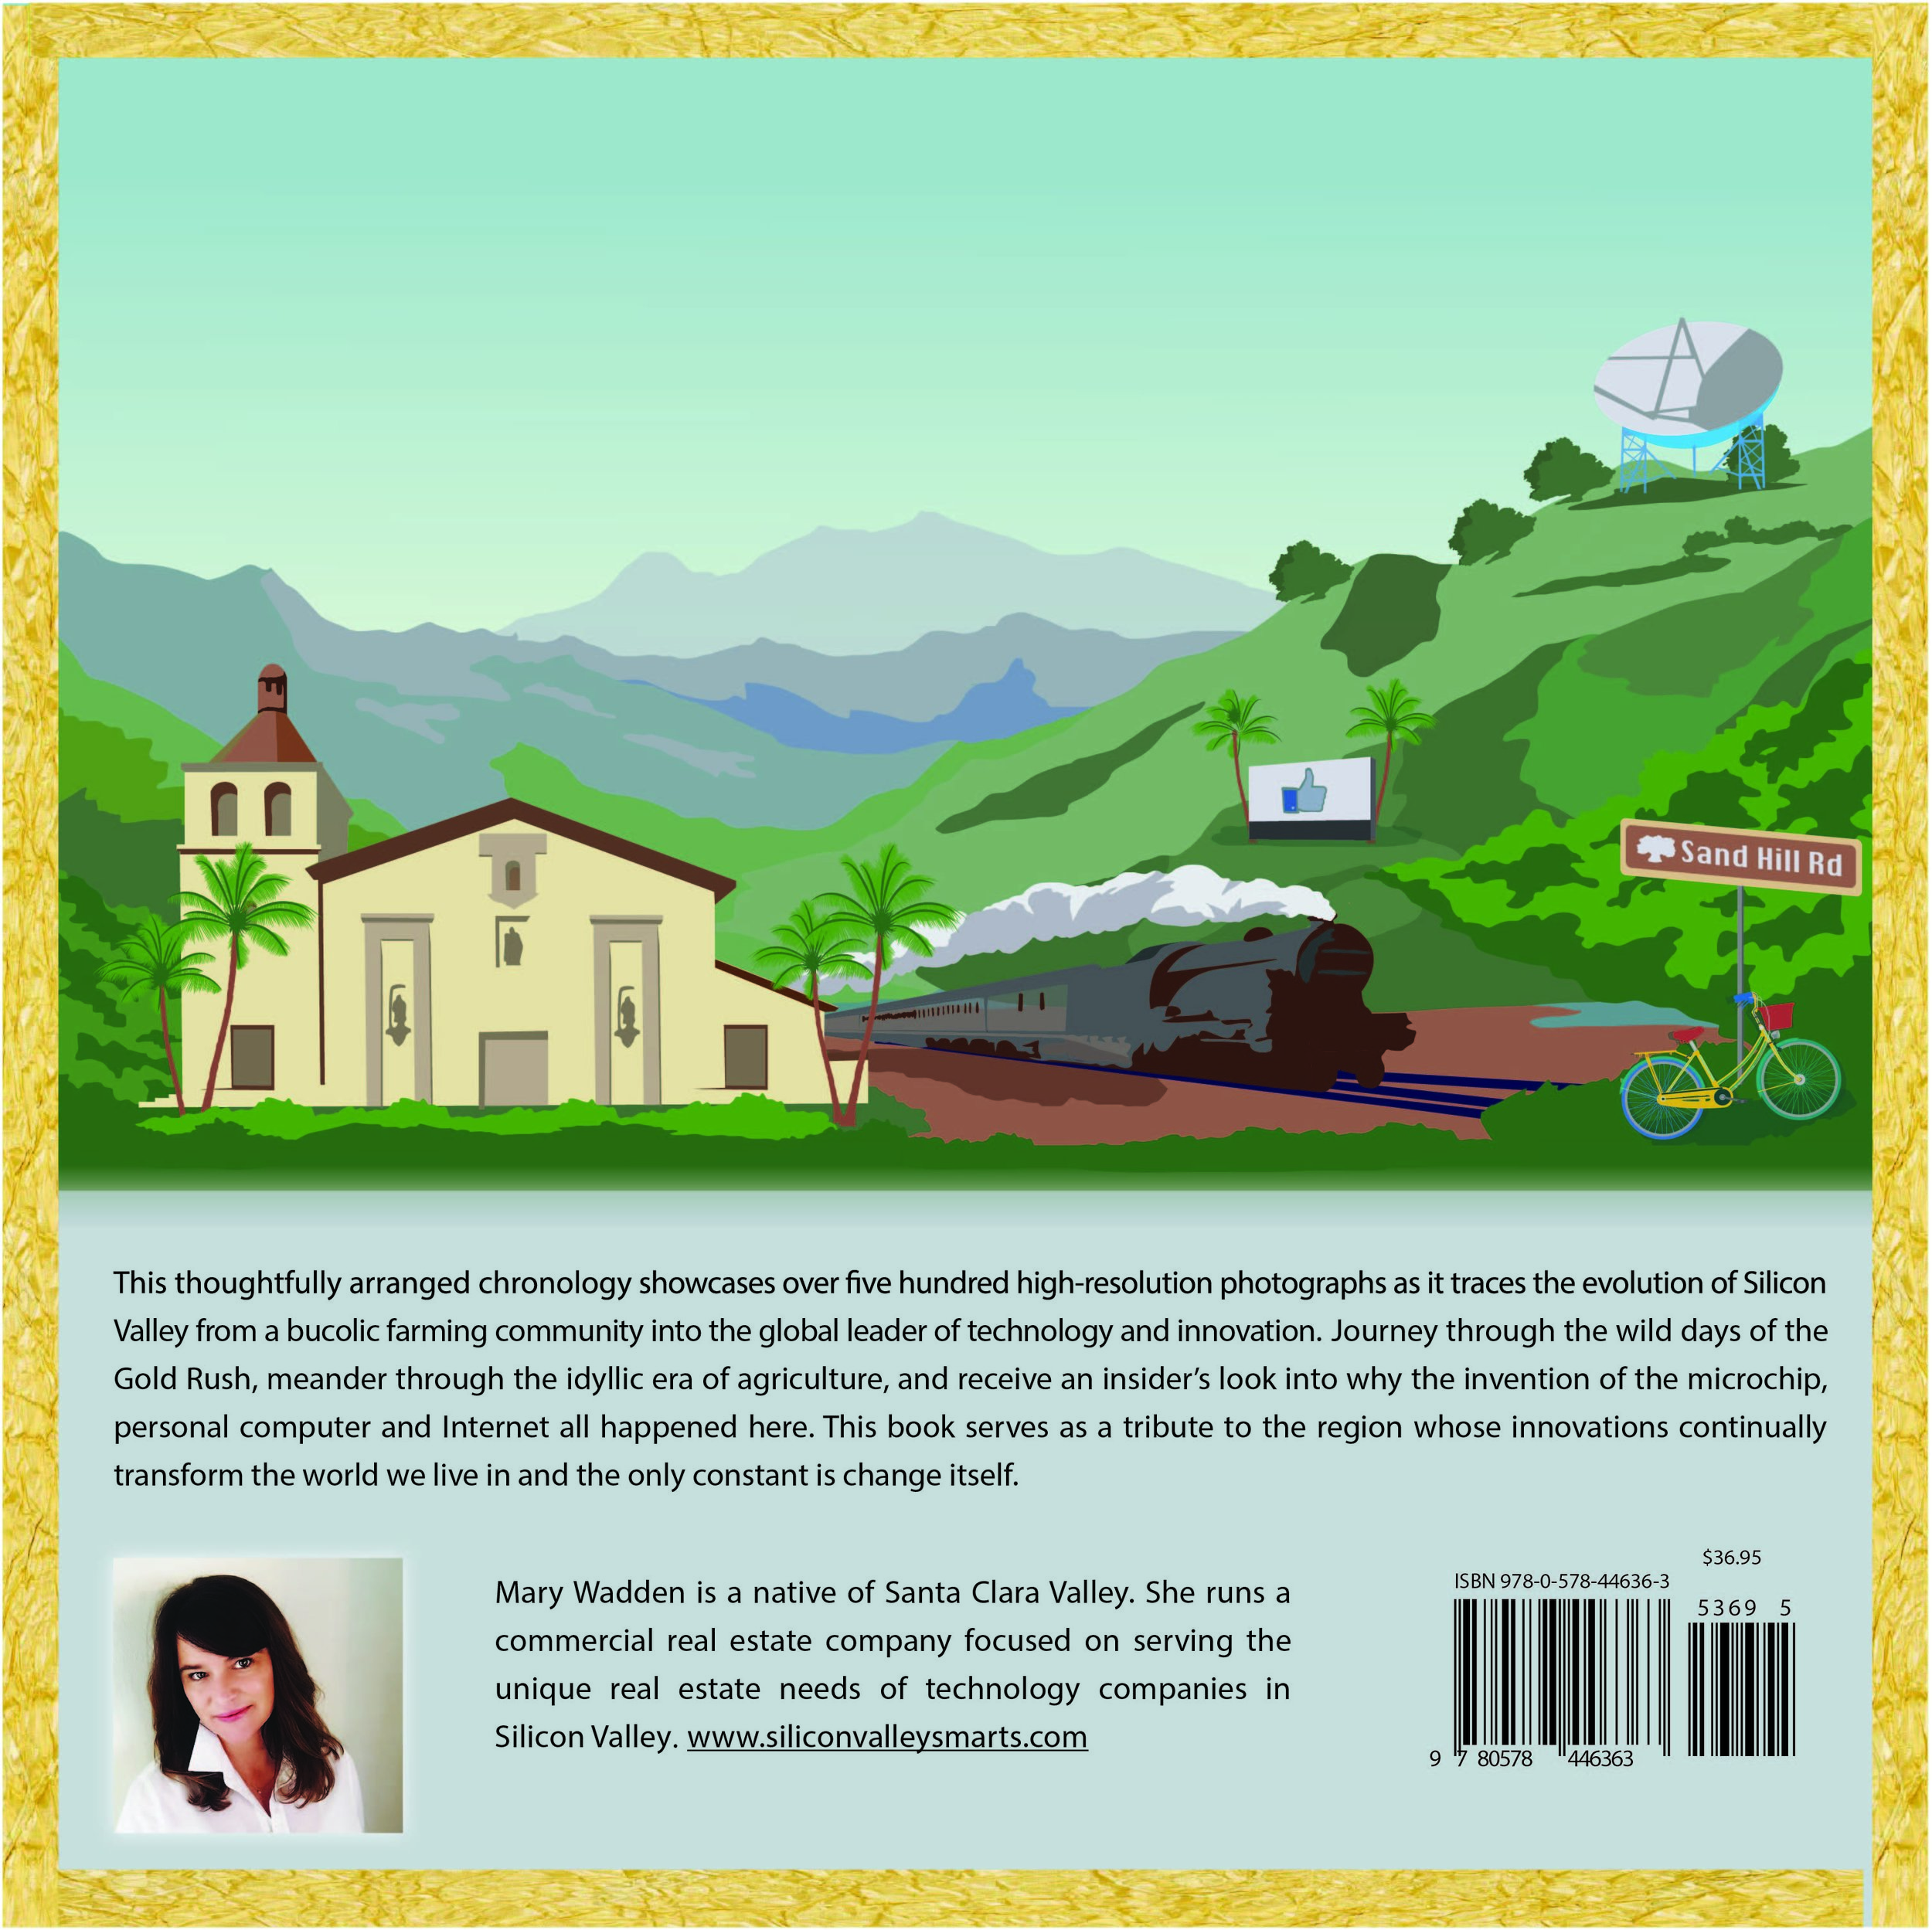 back cover with gold foil.jpg